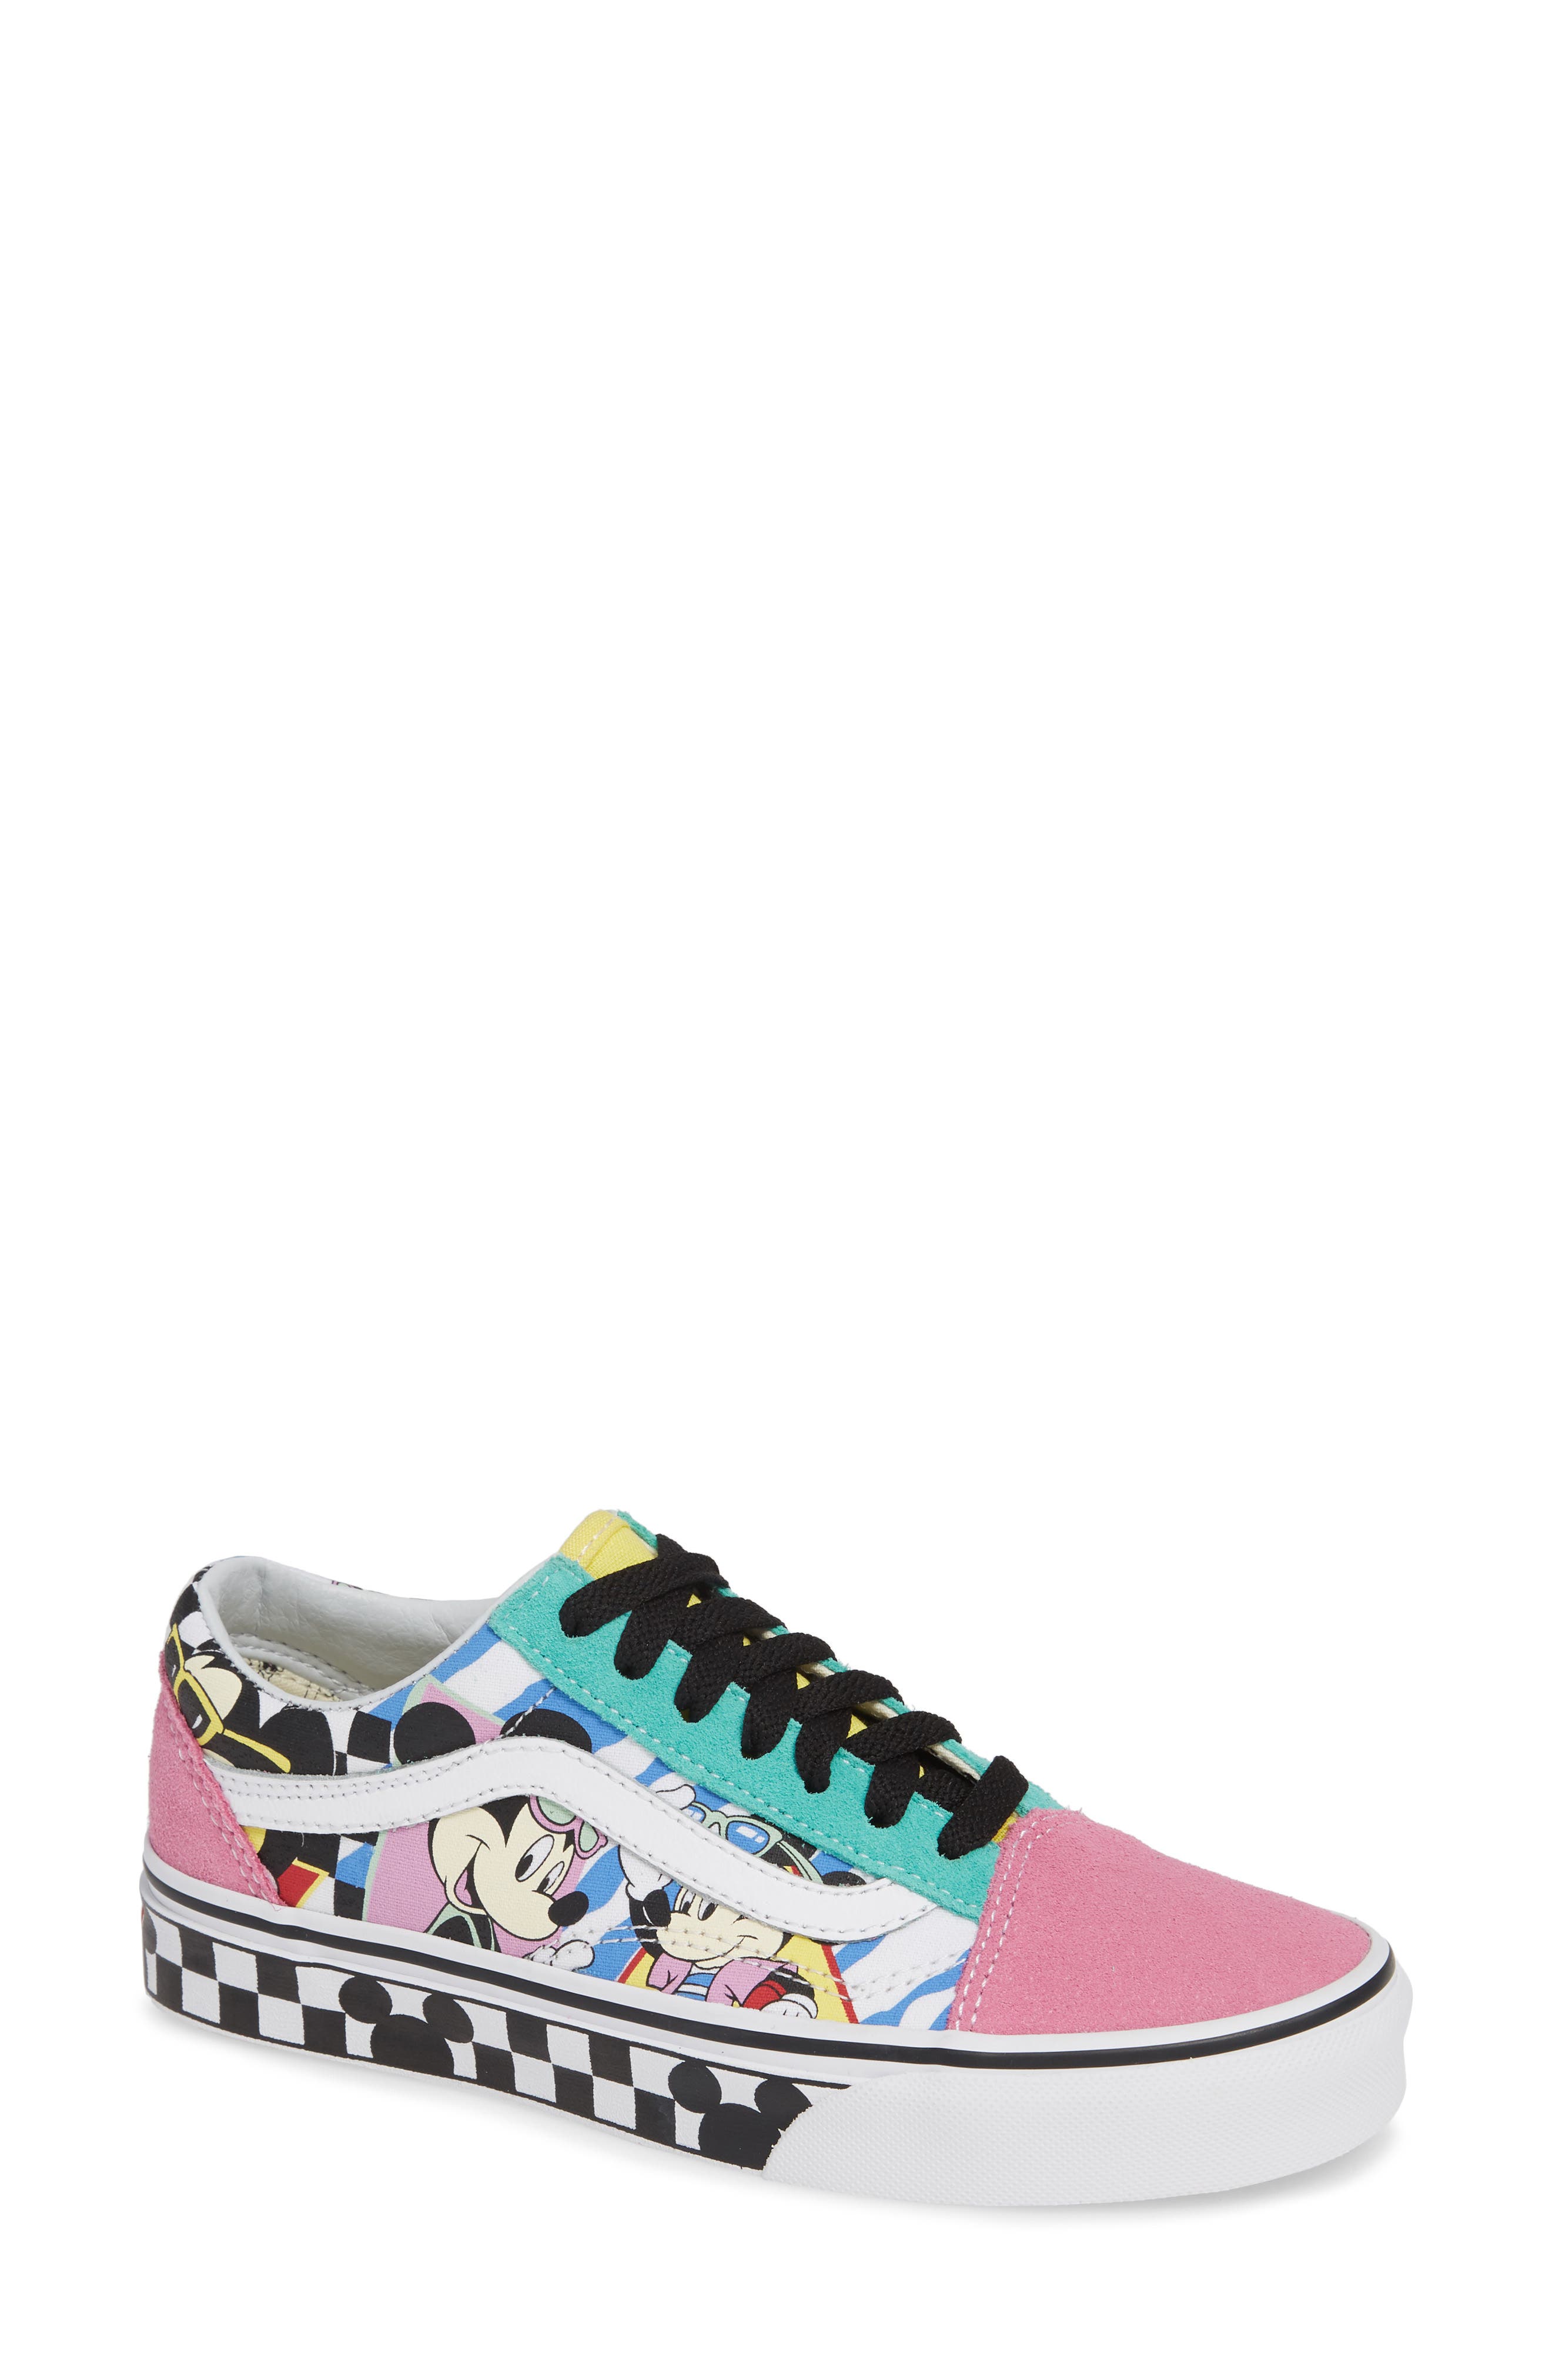 adult mickey mouse vans